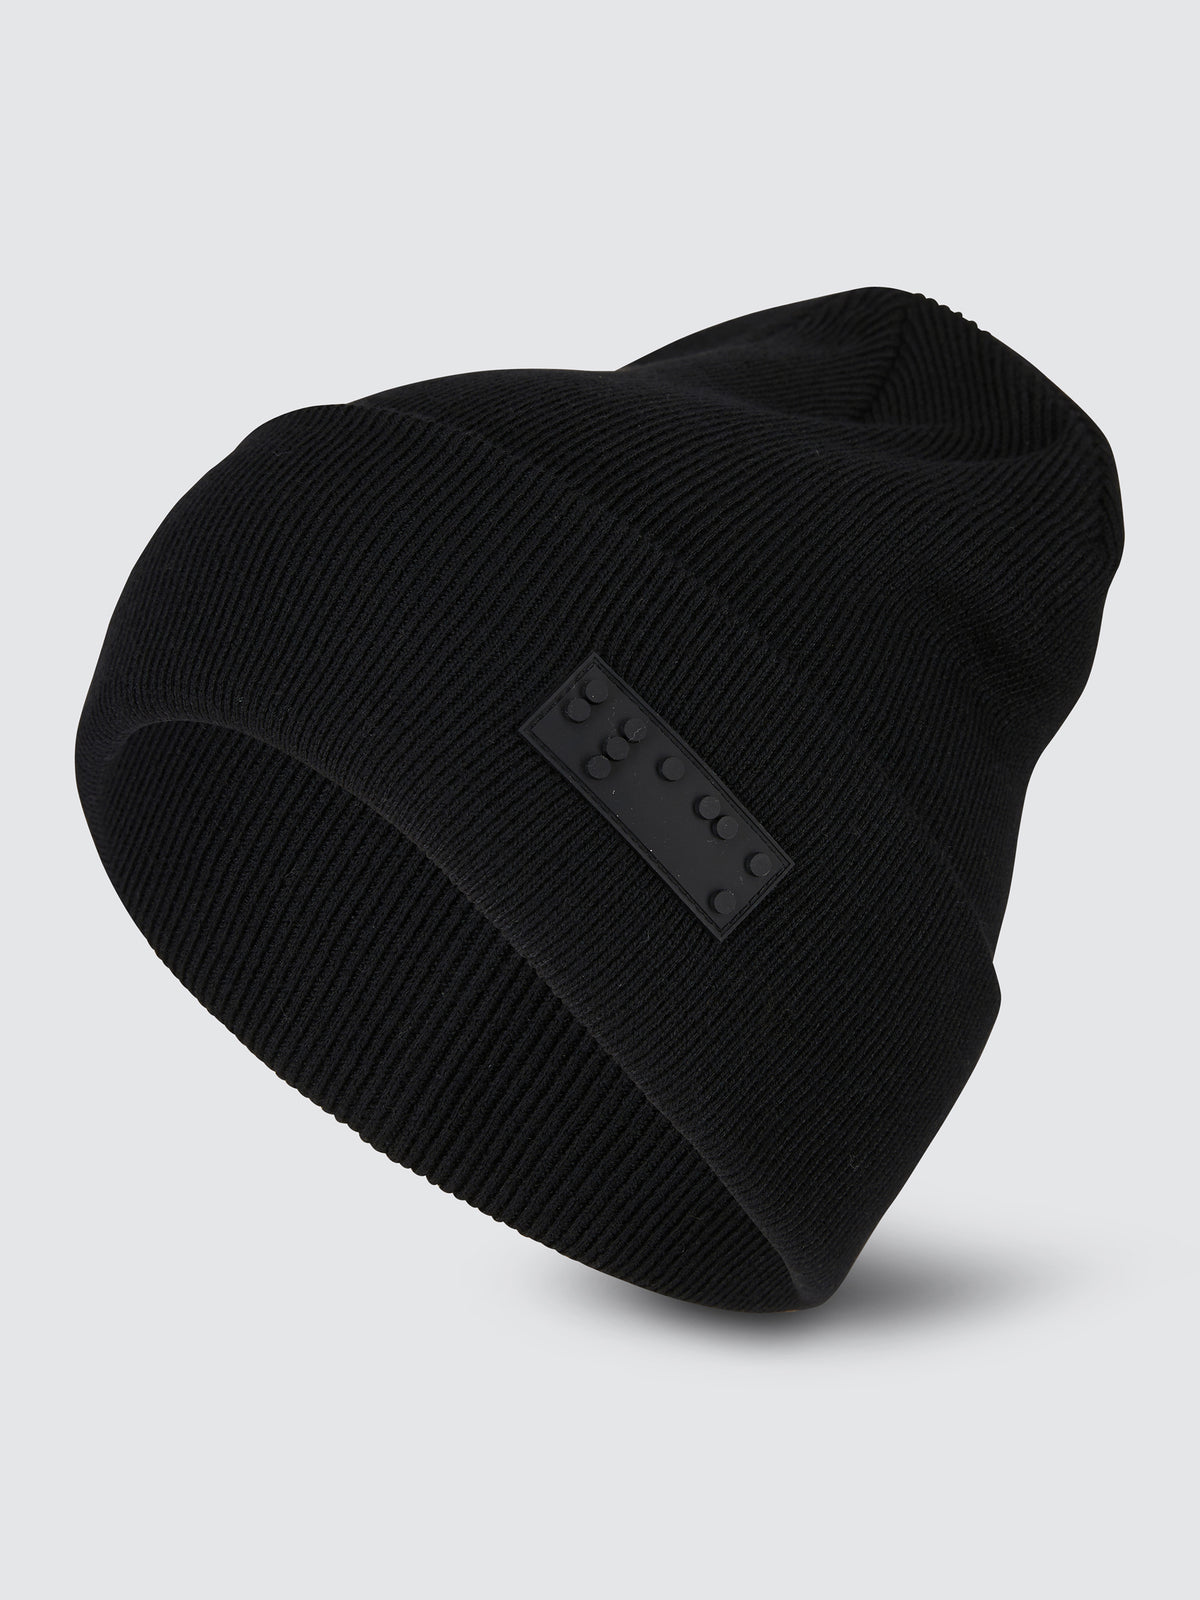 Two Blind Brothers - Gift Rib Knit Watch Cap Grey